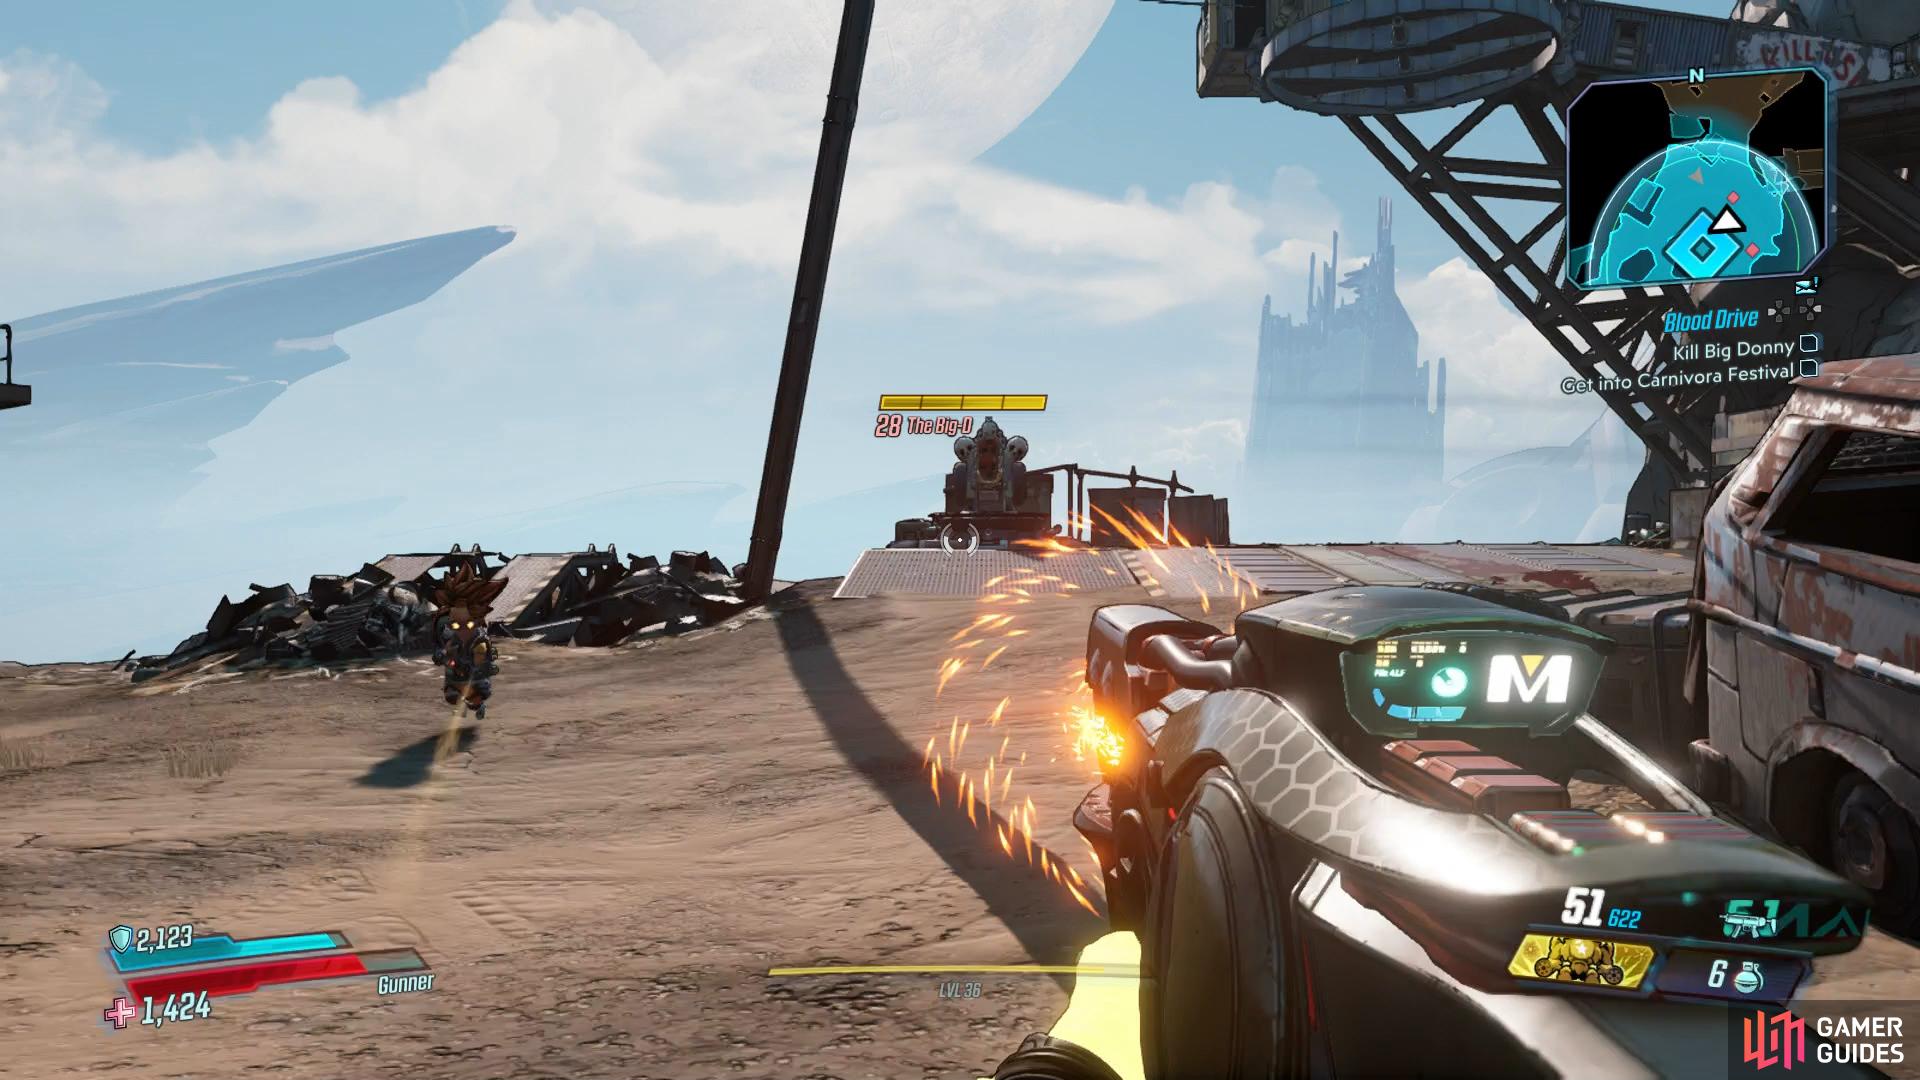 Focus on the missile launcher, The Big D, first to limit the damage you take.